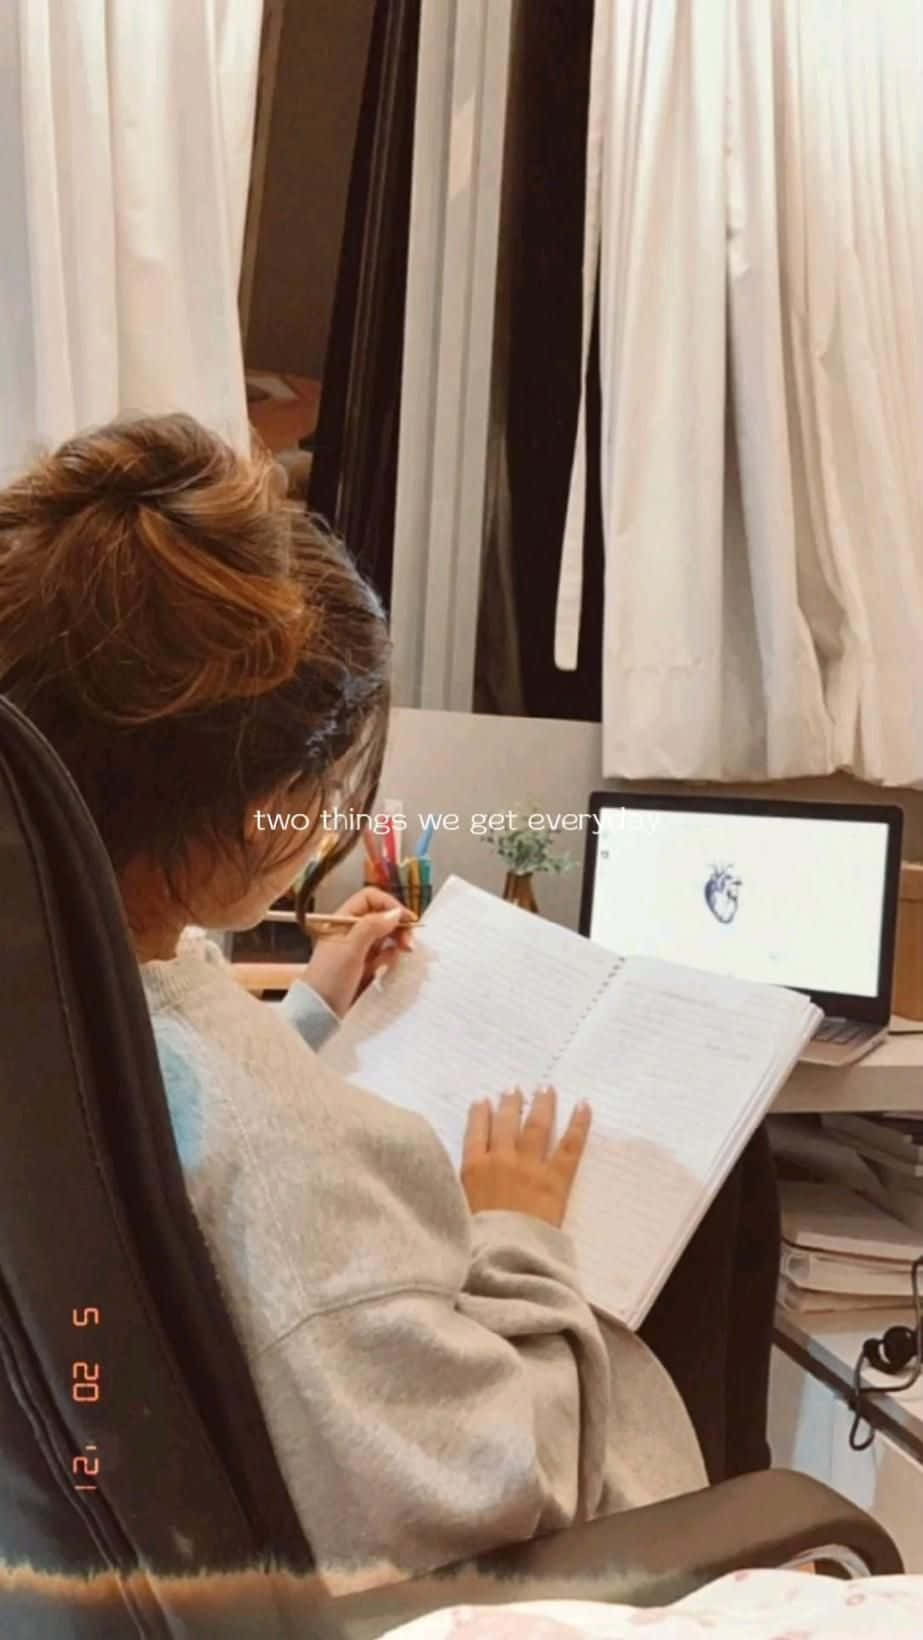 A Woman Is Sitting In A Chair And Writing On A Laptop